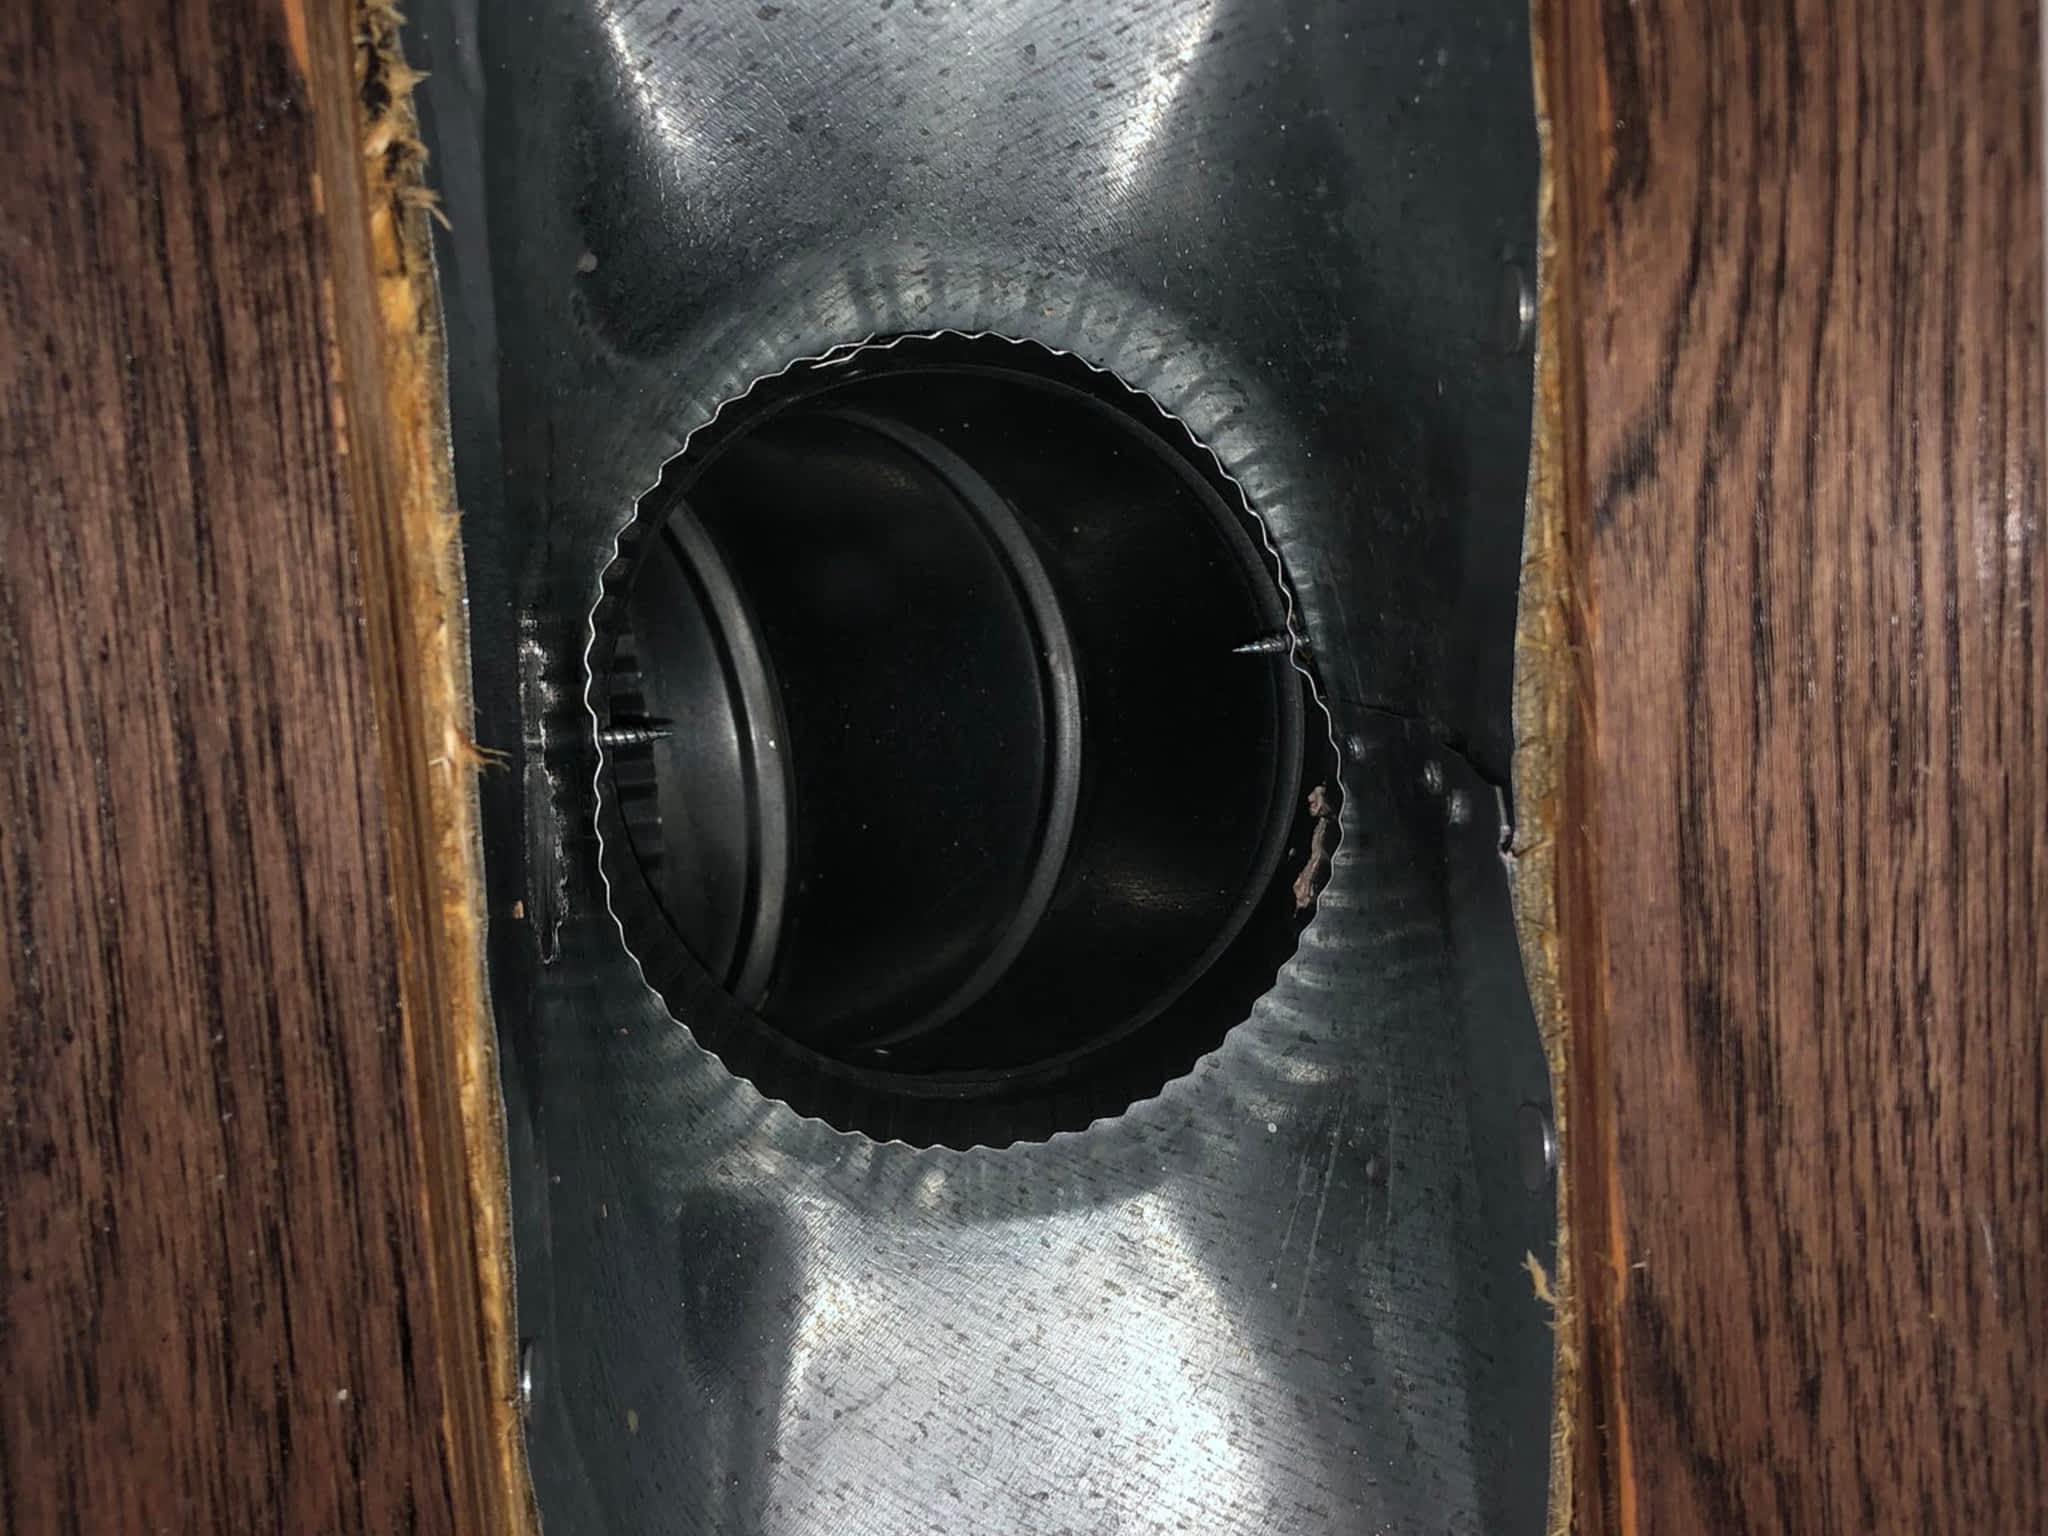 photo SM Duct Cleaning